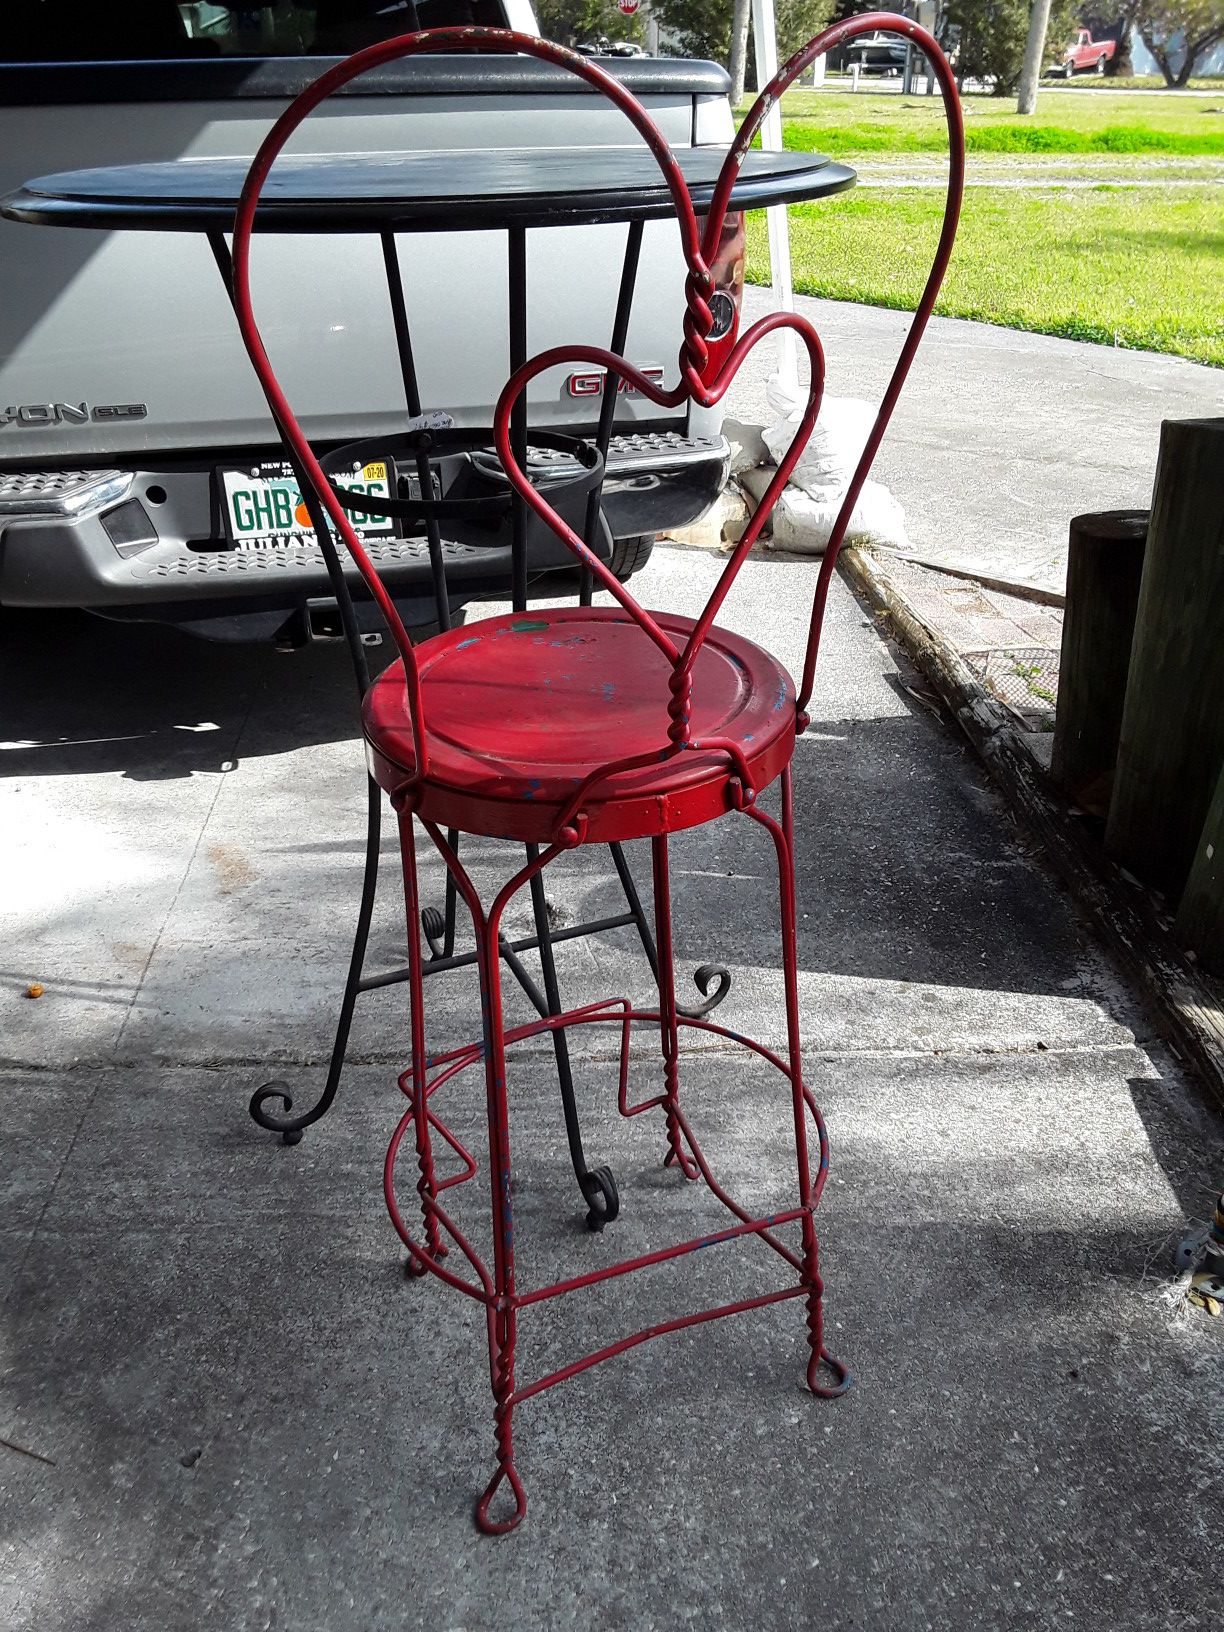 Antique metal icecream high chair and table